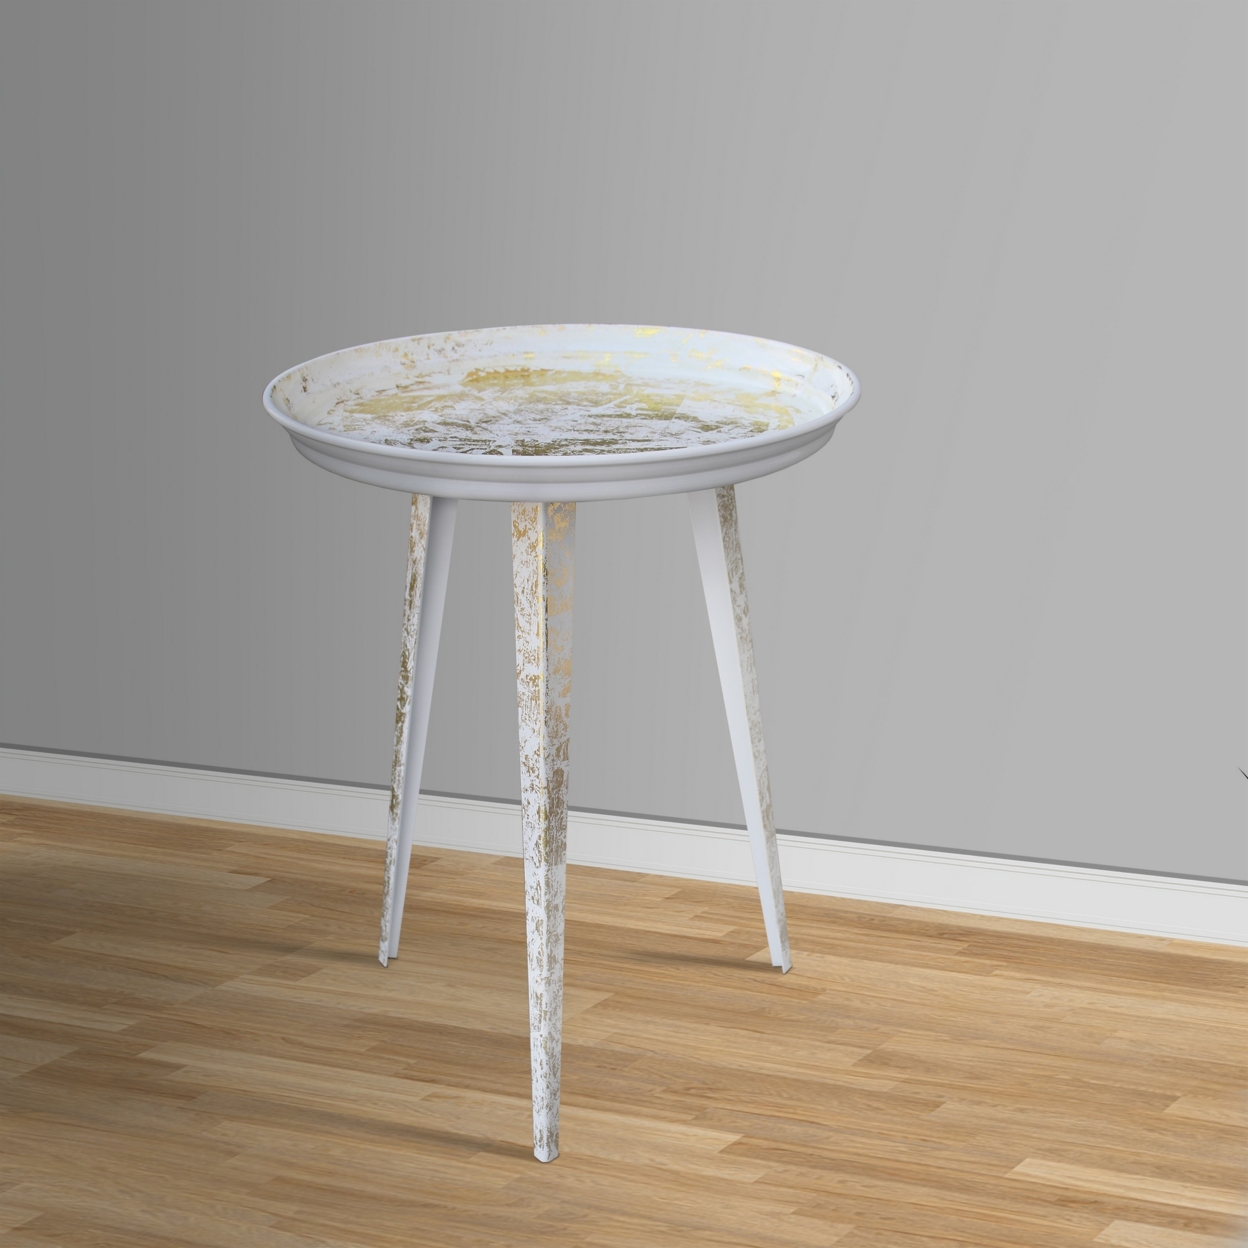 20 Inch Artisanal Industrial Round Tray Top Iron Side End Table, Tripod Base, Distressed White, Gold- Saltoro Sherpi